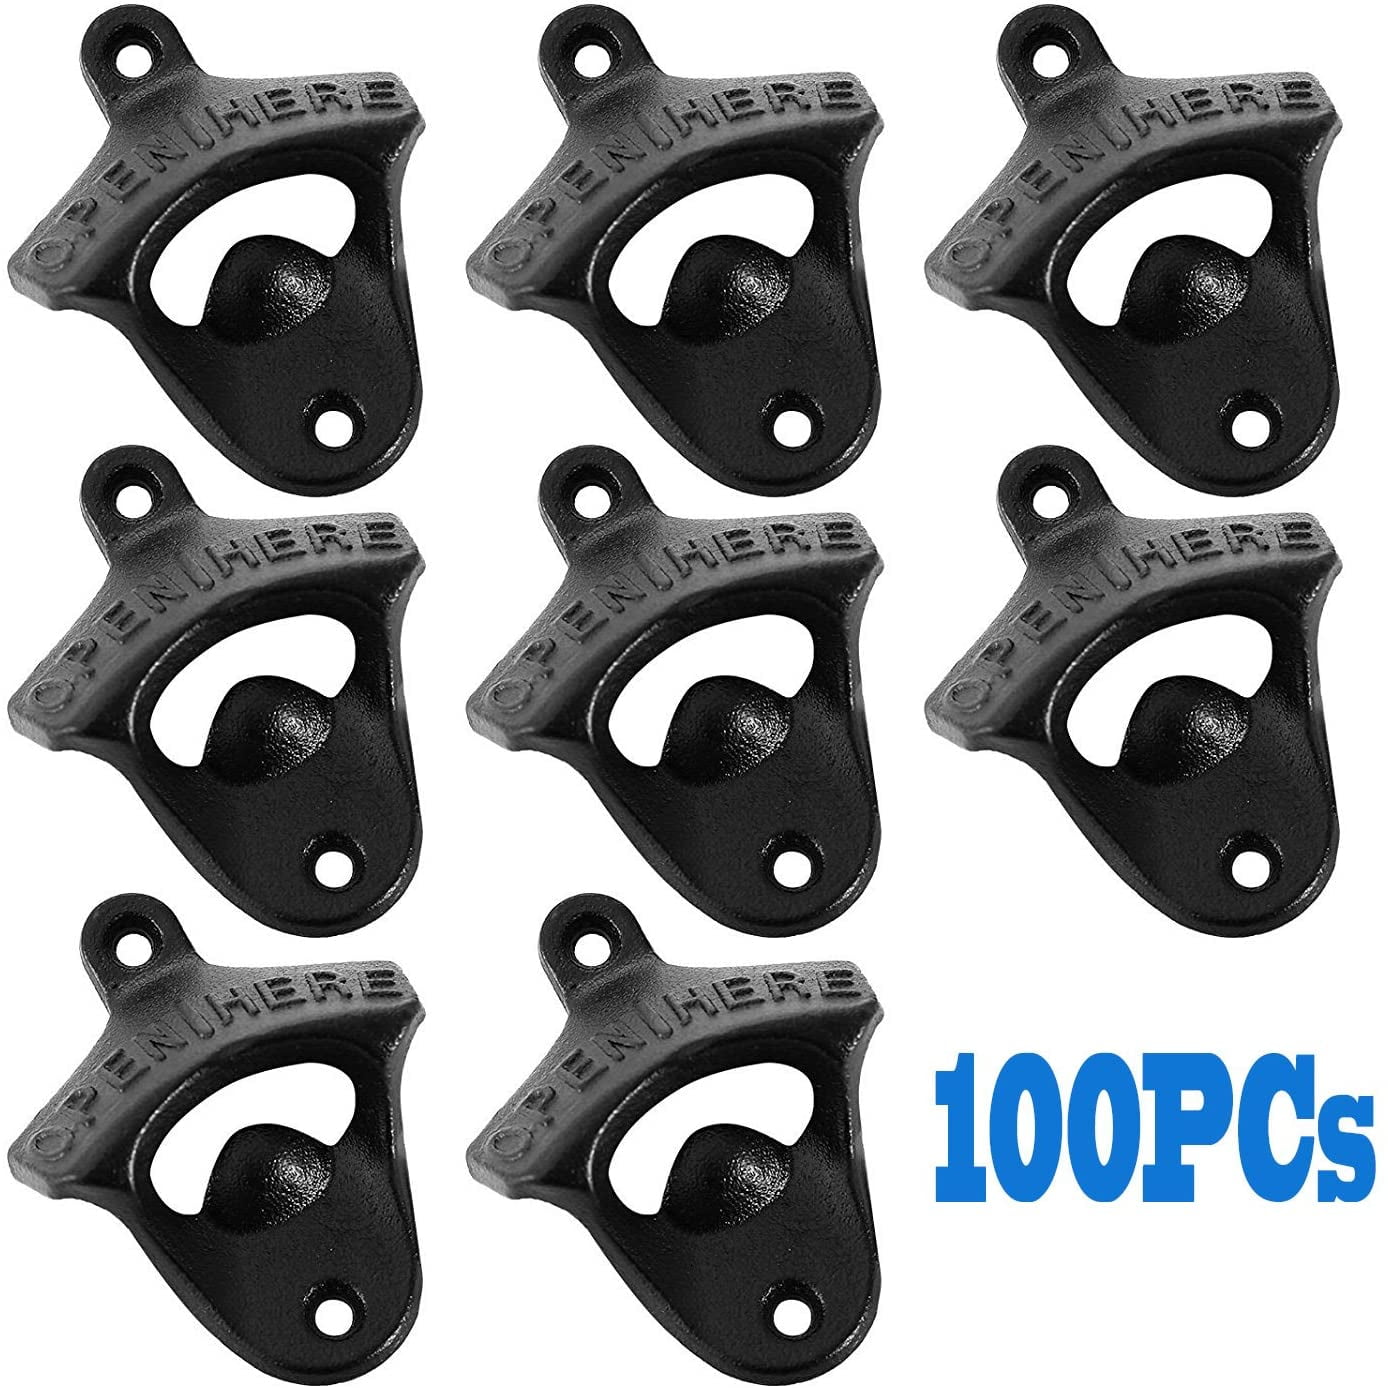 50PCS Pack Retro Vintage Bottle Opener with Mounting Screws Wall Mounted  Rustic Beer Opener Set for Kitchen Cafe Bars Wholesale